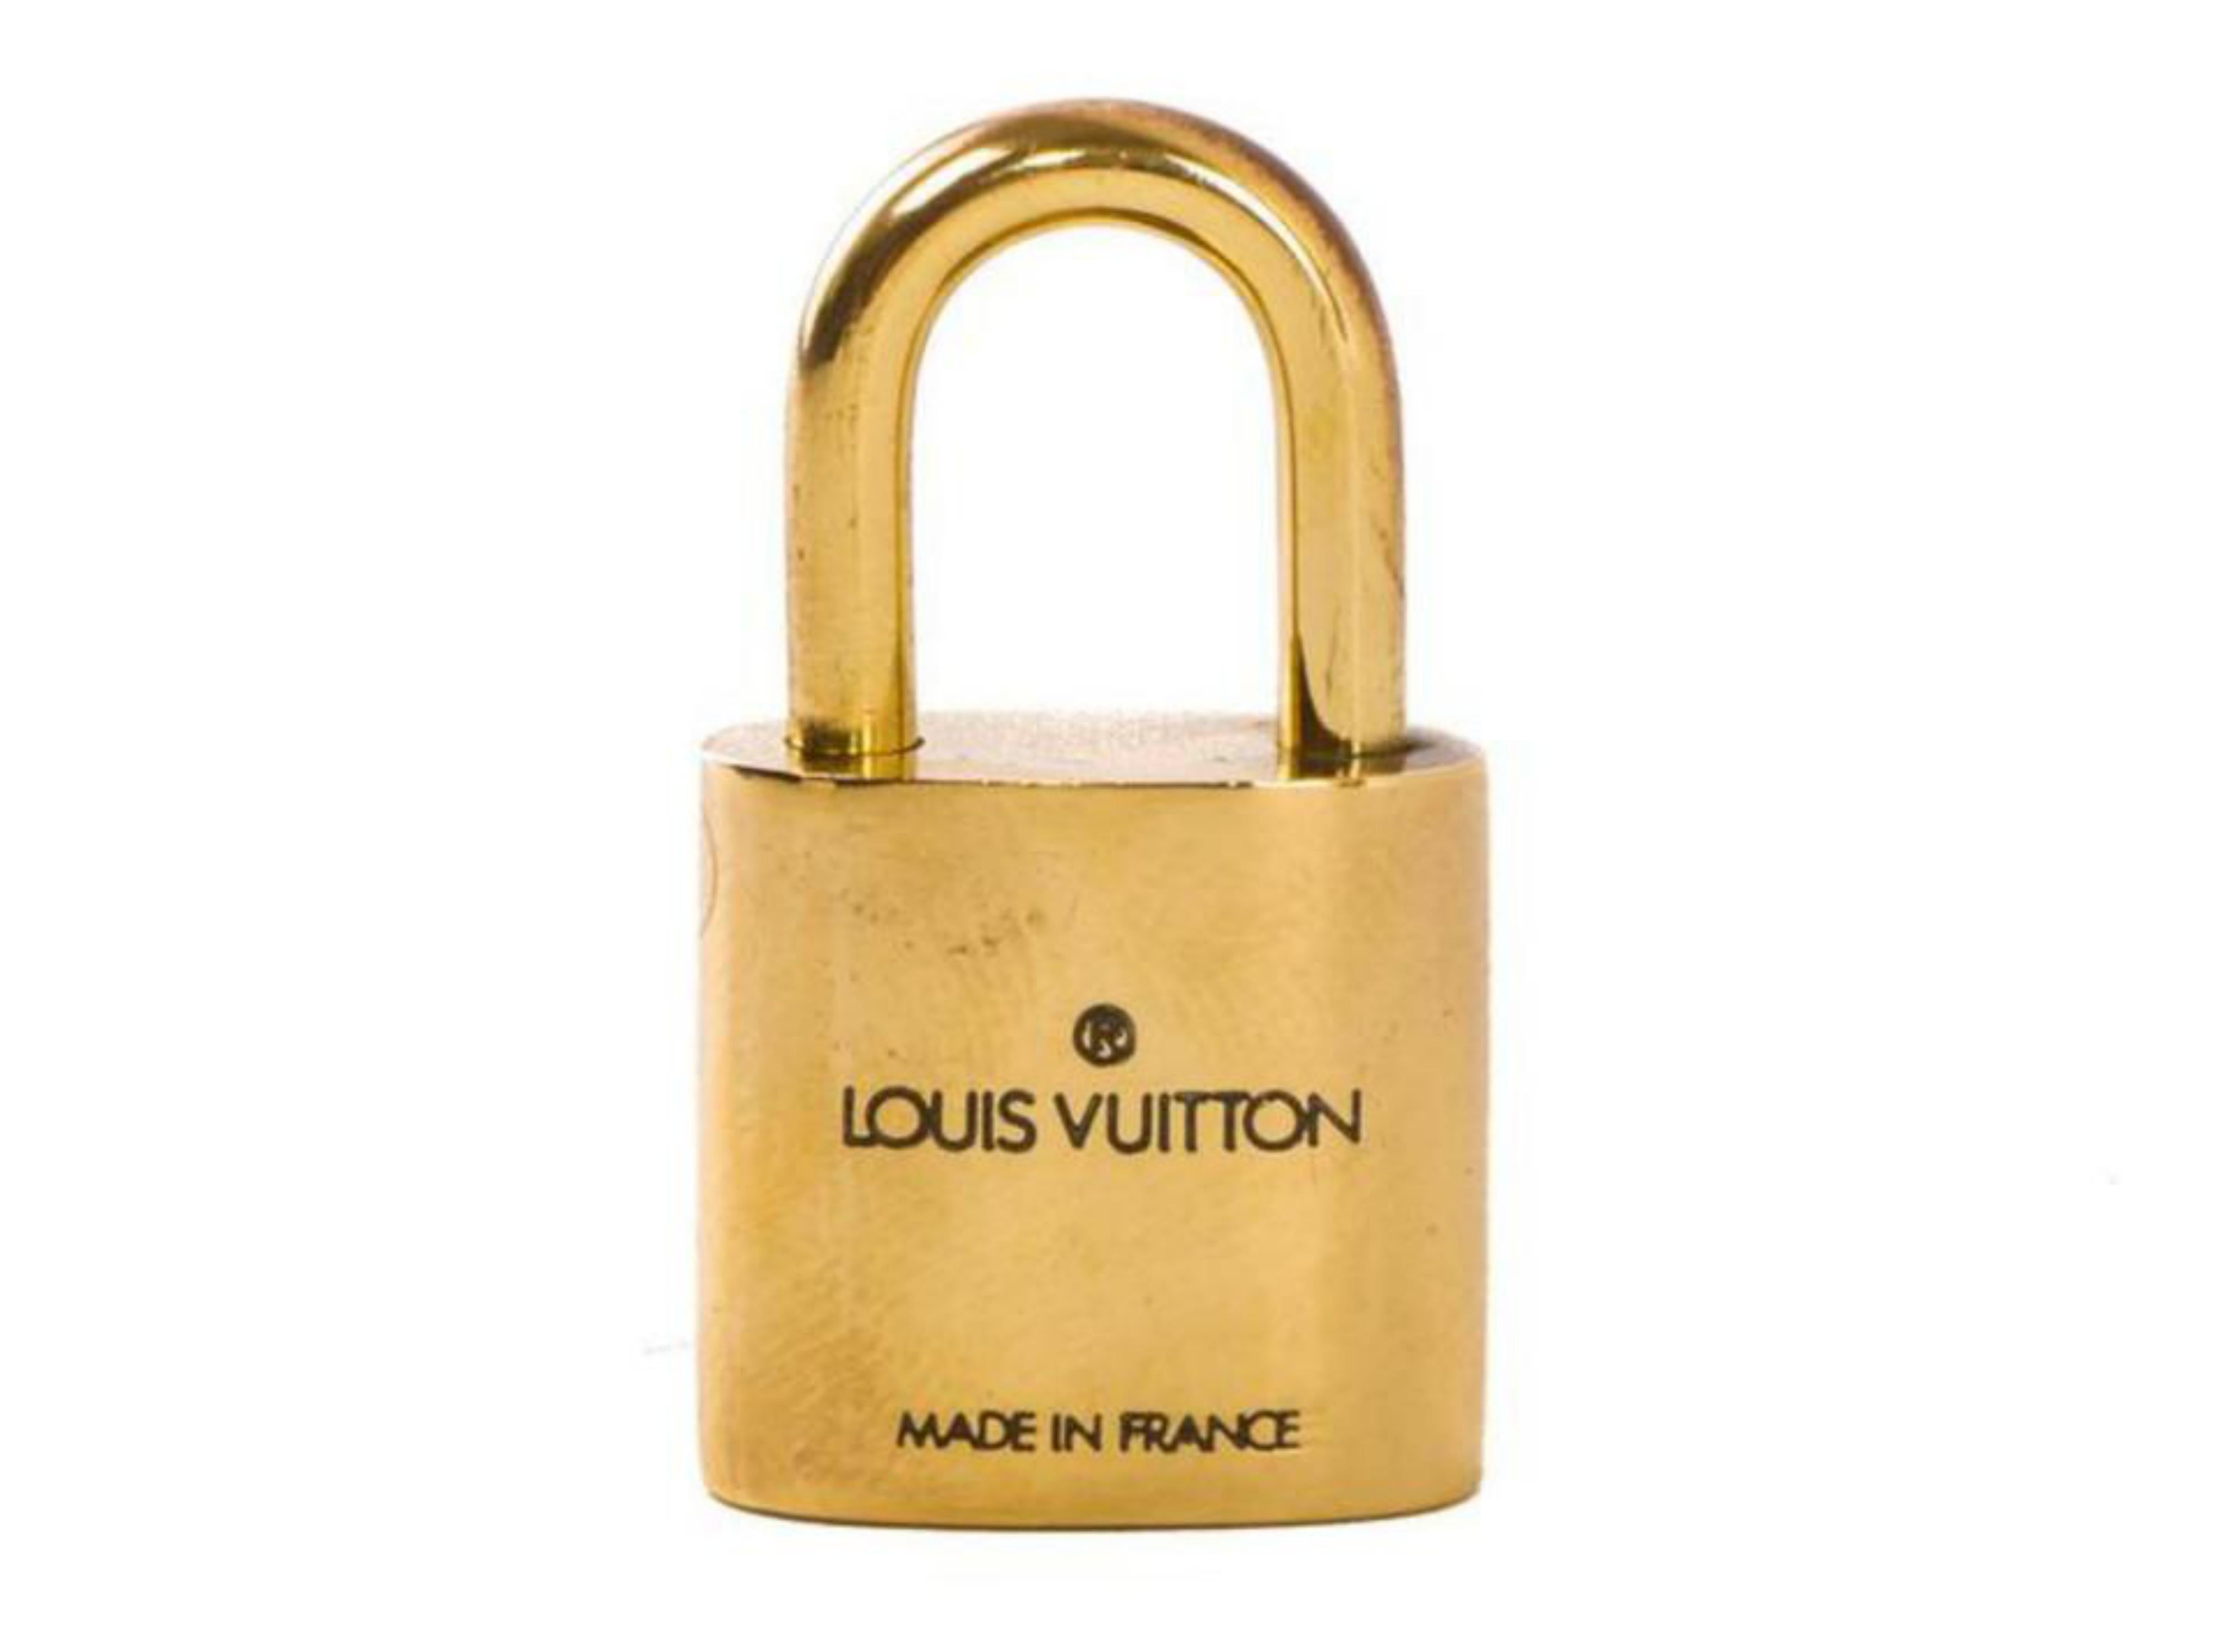 Louis Vuitton Gold Single Key Lock Pad Lock and Key 867586 For Sale 1